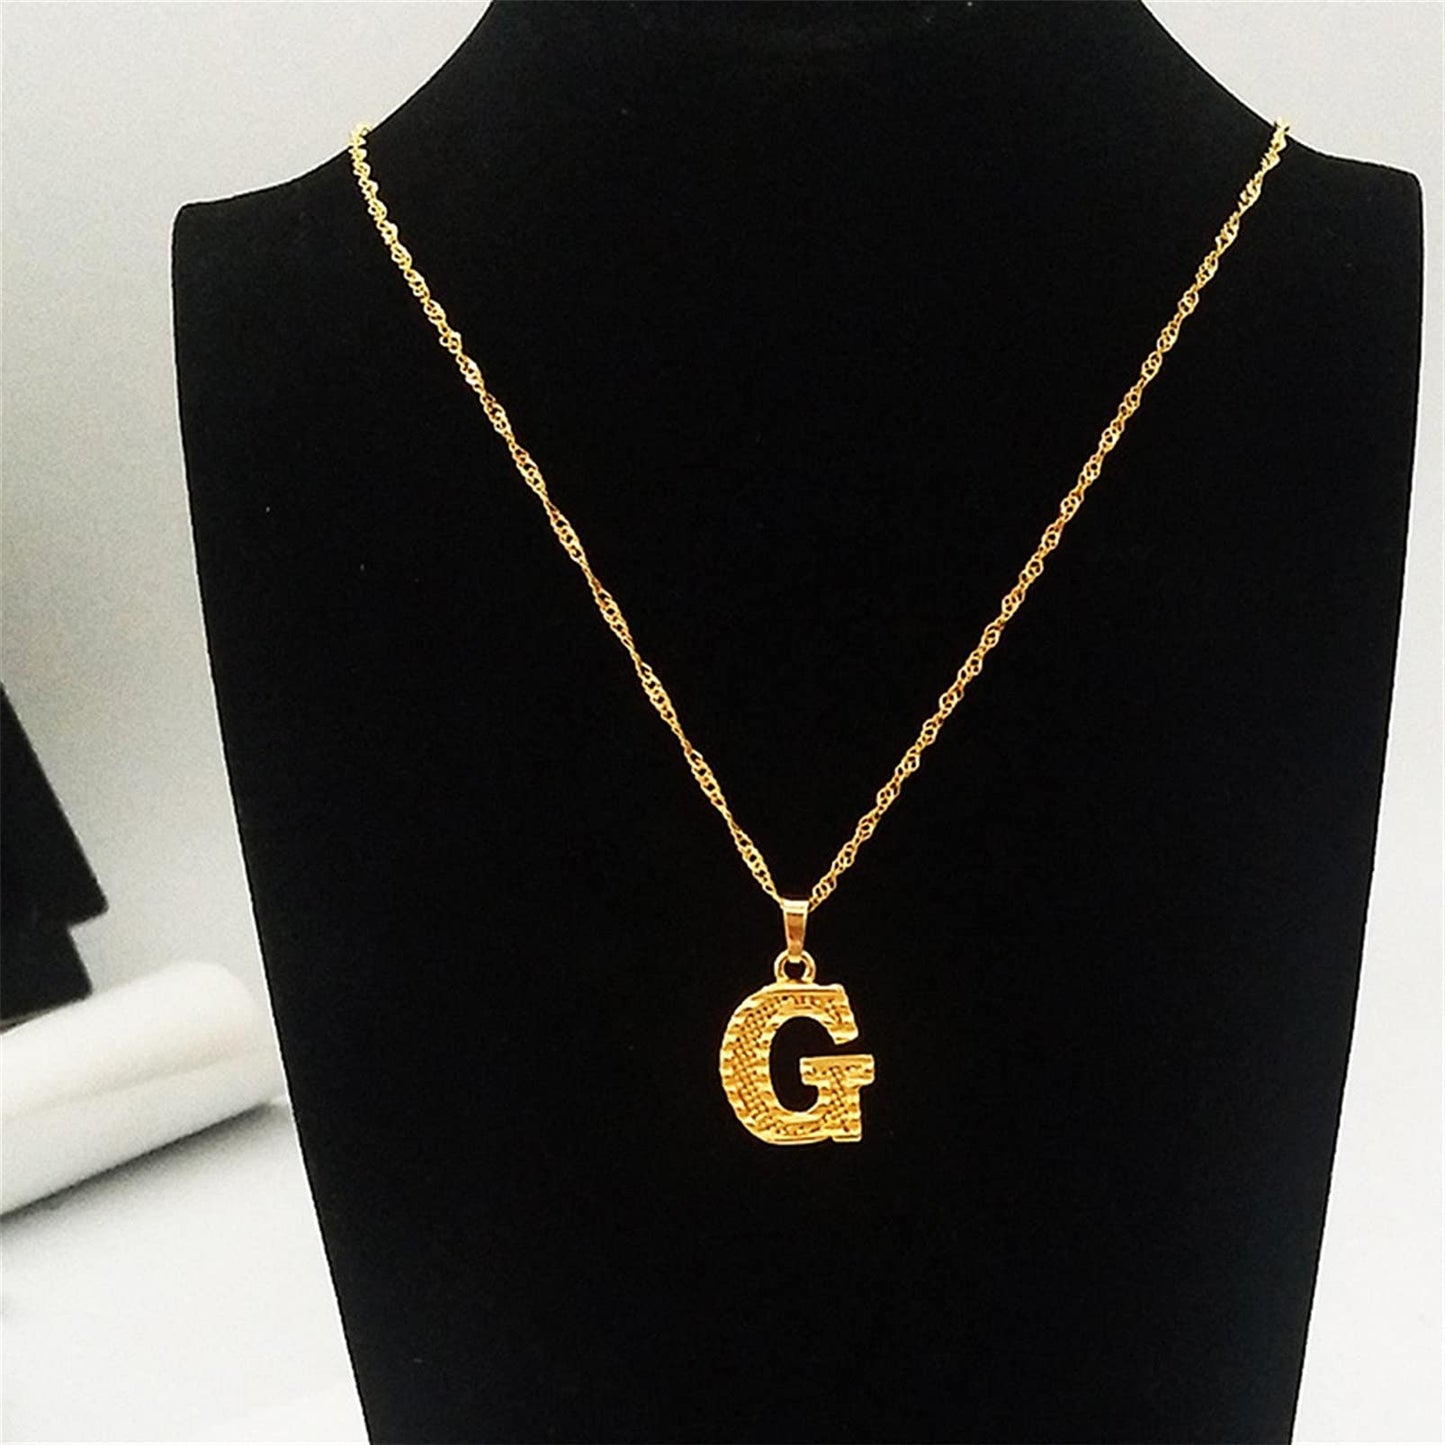 Simple English Capital Letters Pendant Necklace Unique Meaning for Women Men Accessories Gift,G#